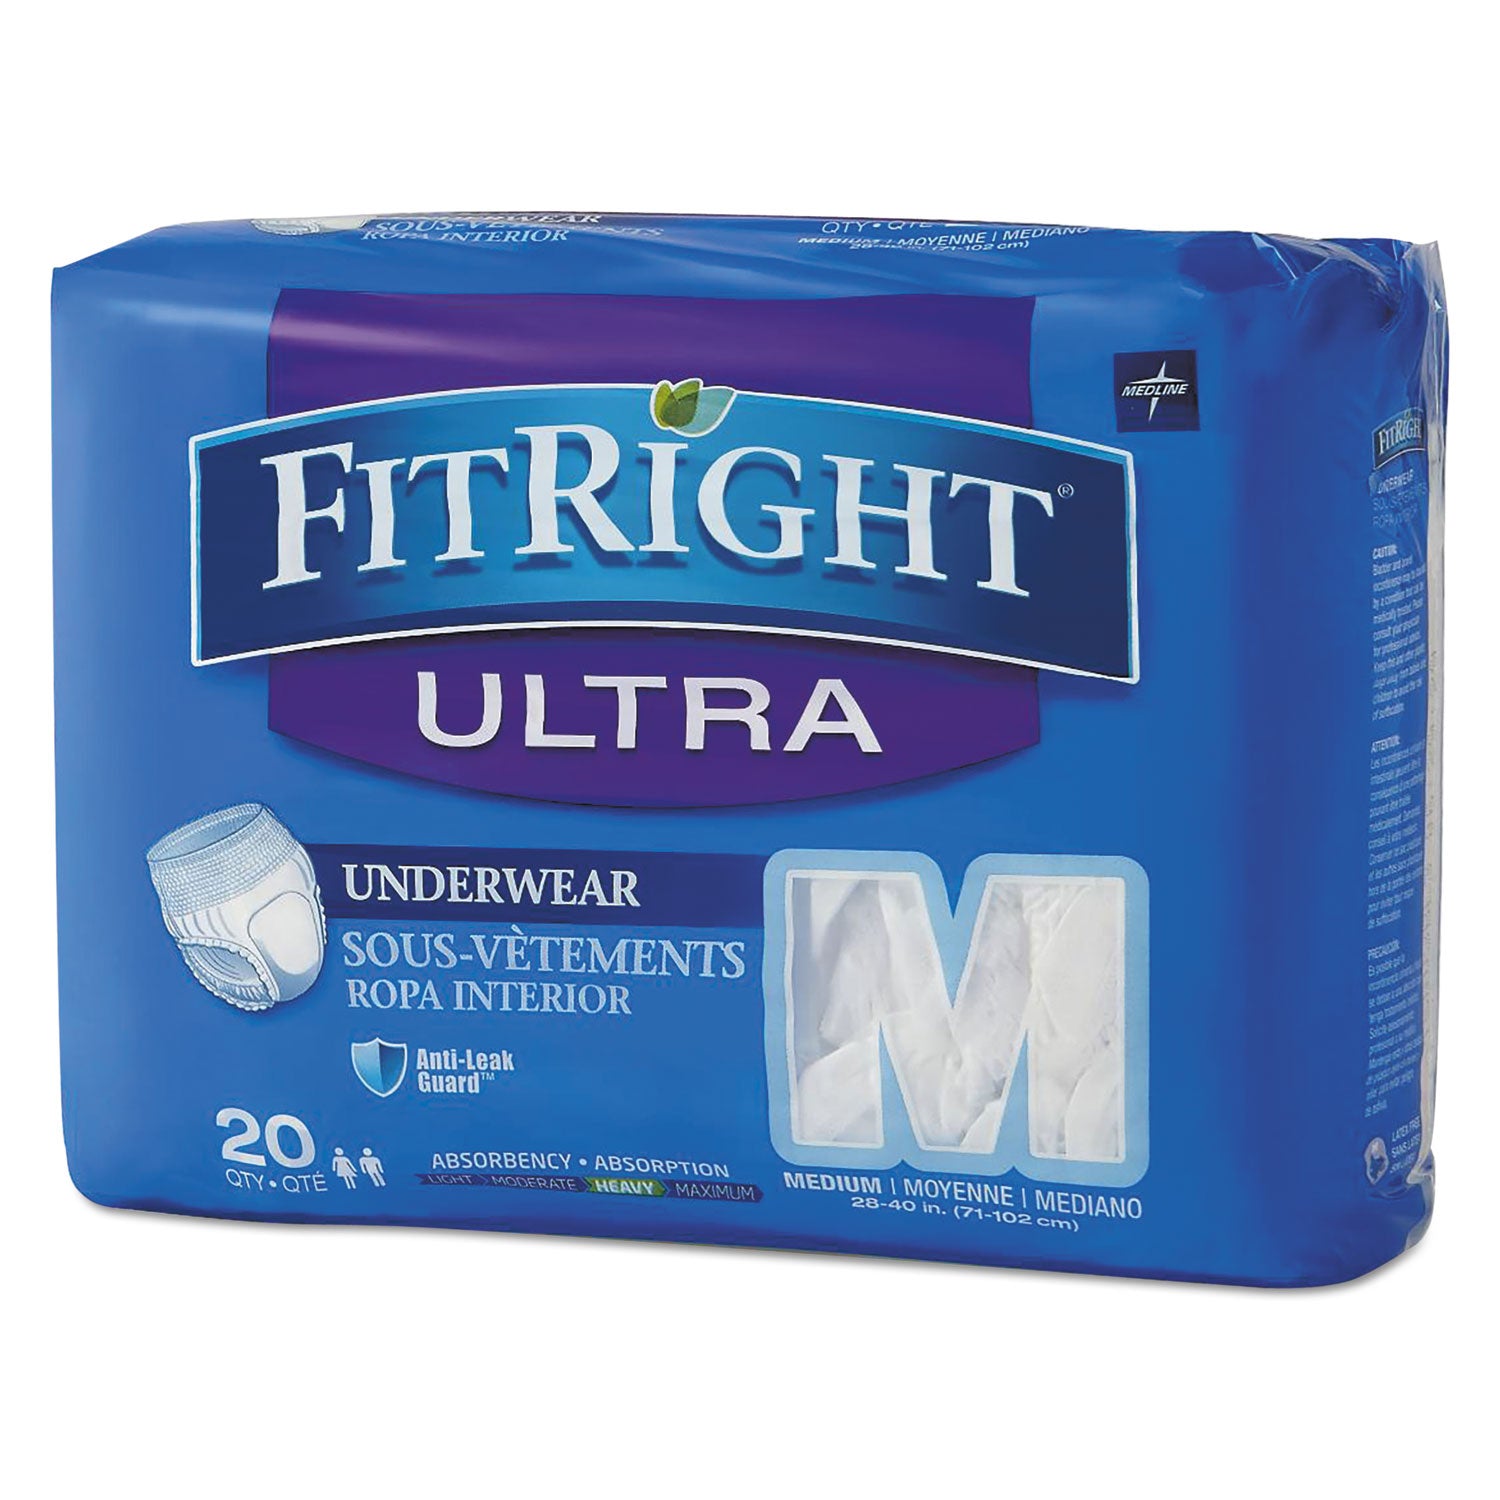 fitright-ultra-protective-underwear-medium-28-to-40-waist-20-pack_miifit23005a - 1